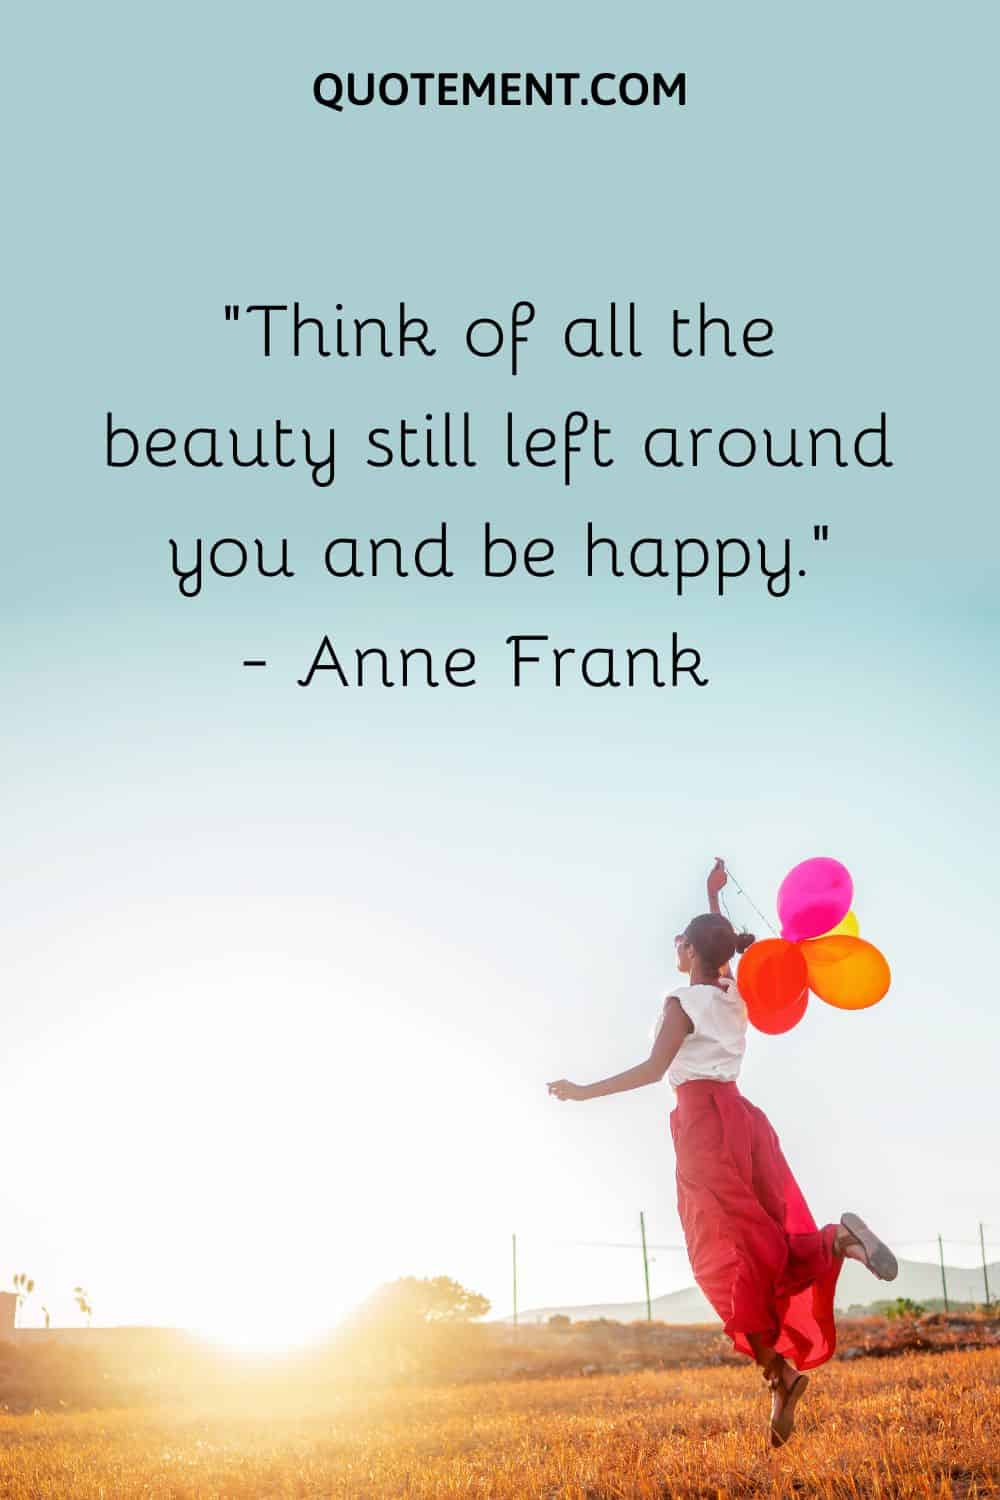 Think of all the beauty still left around you and be happy